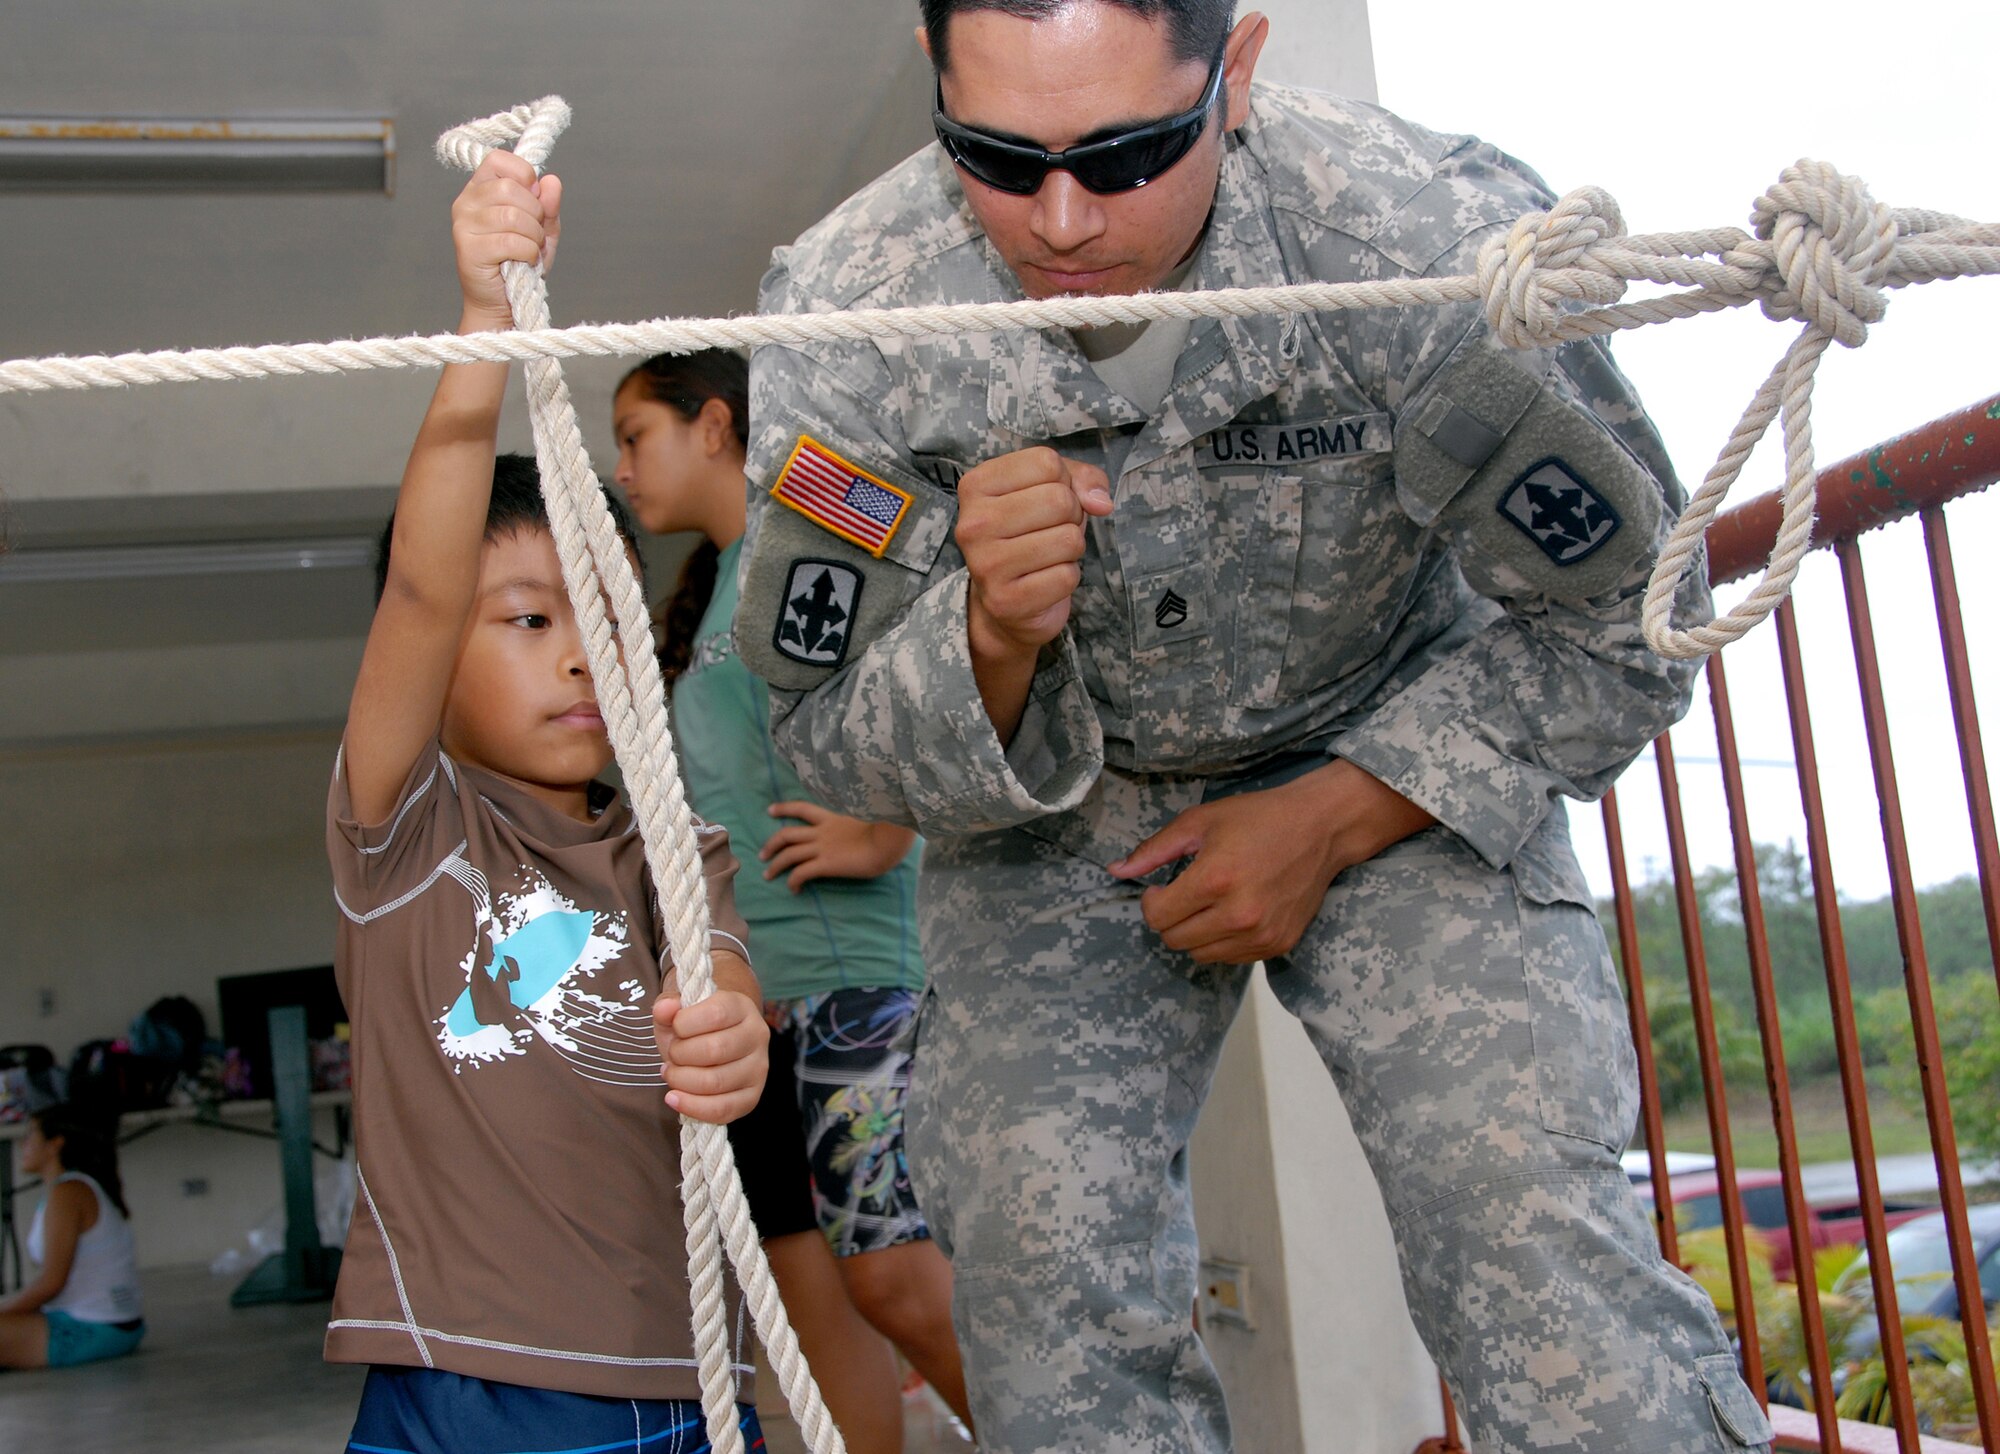 Staff Sgt. Justen Laupola, Counterdrug Hawaii National Guard, gives young boy tips on tying a figure eight knot as part of the Drug Demand Reduction program on Guam, June 29. The DDR program is part of the National Guard's Counterdrug Program that emphasizes education and training as part of its drug abuse prevention program. (U.S. Air Force photo/Tech. Sgt. Betty J. Squatrito-Martin) 